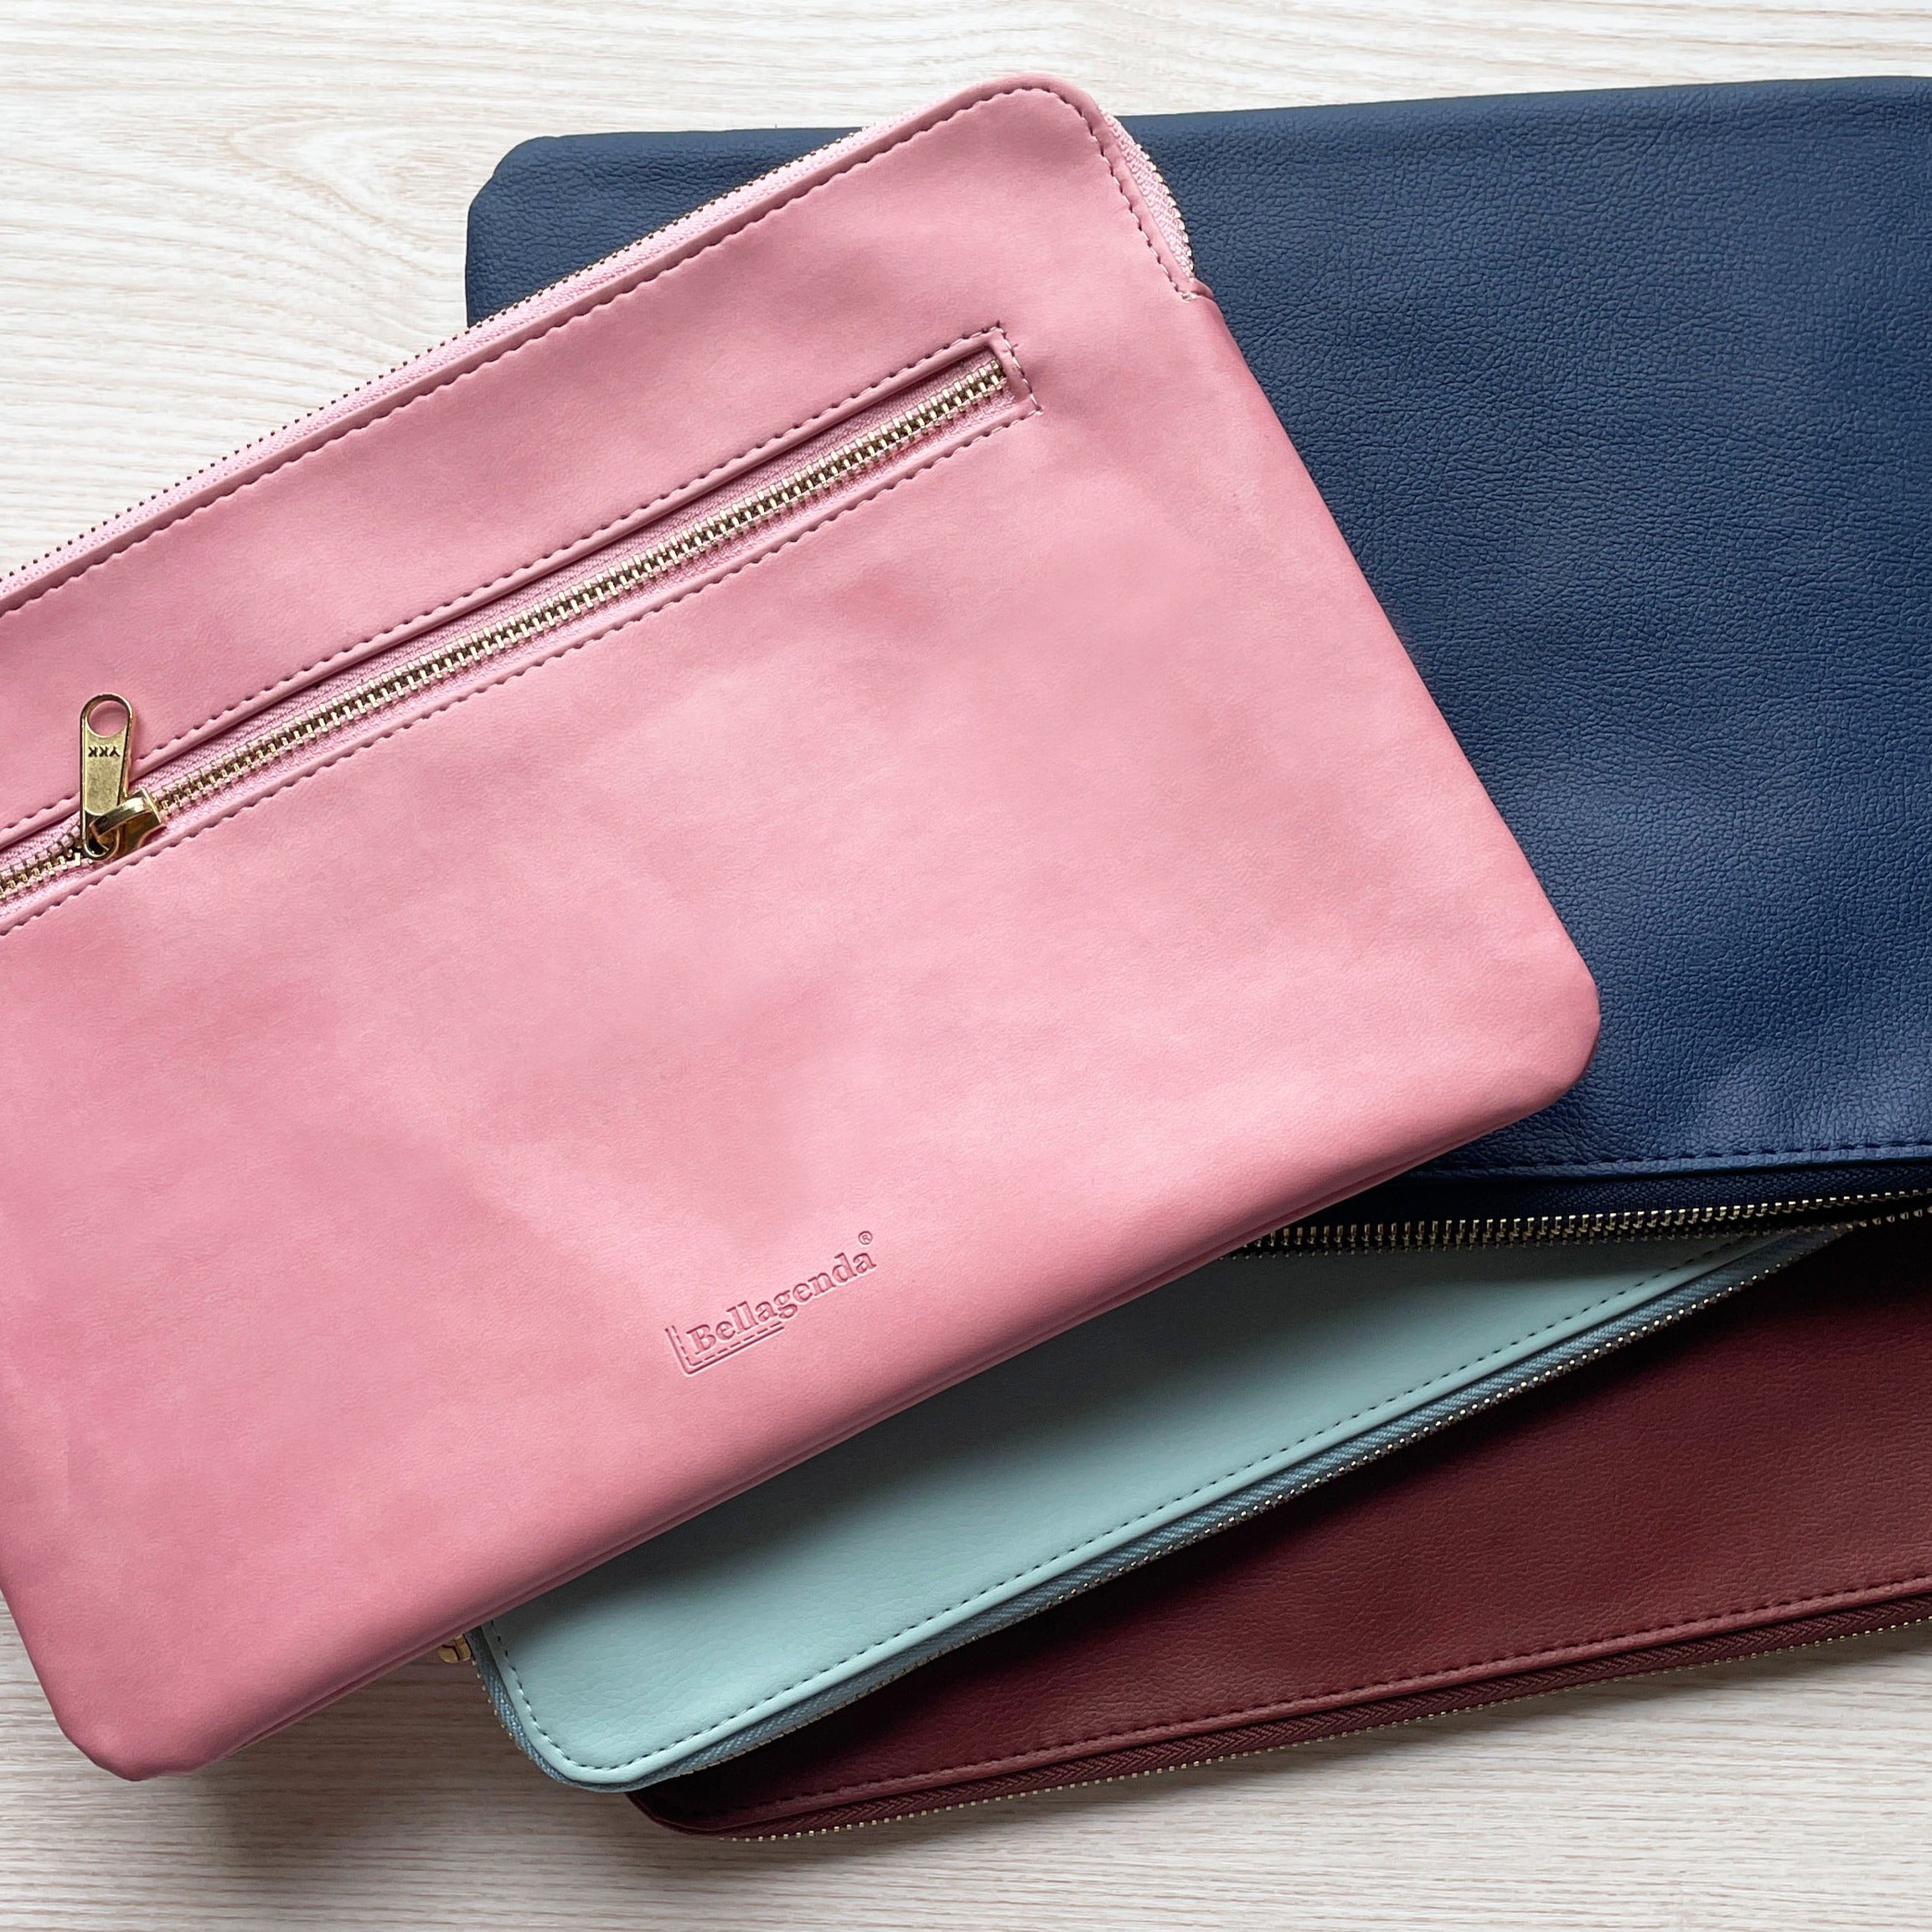 Tablet sleeve with zipper closure and back Pocket